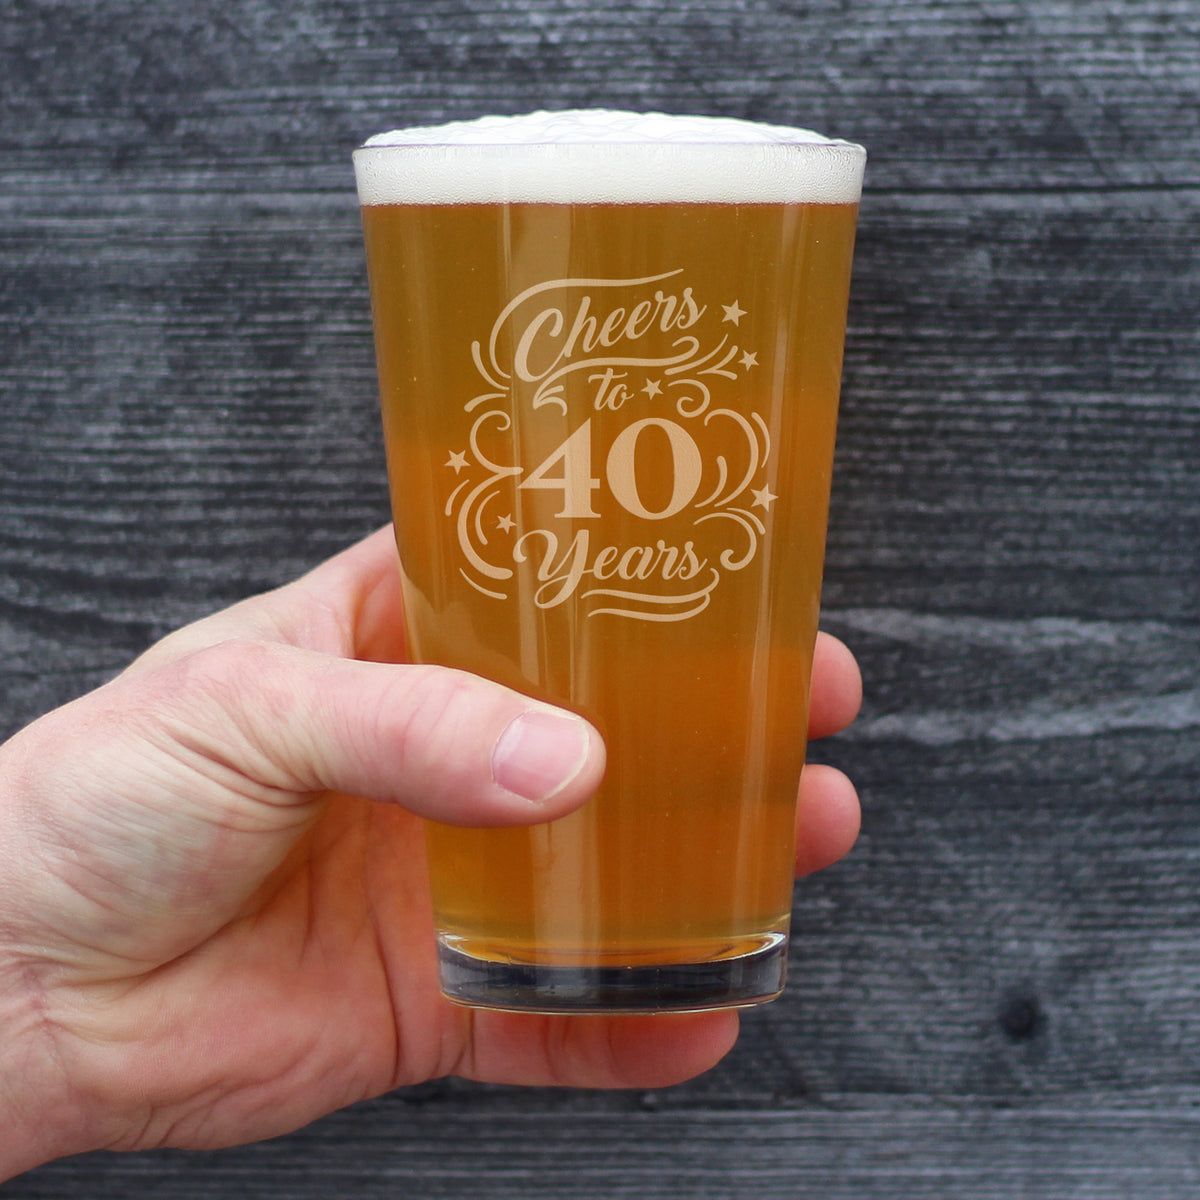 Cheers to 40 Years - Pint Glass for Beer - Gifts for Women &amp; Men - 40th Anniversary Party Decor - 16 Oz Glasses